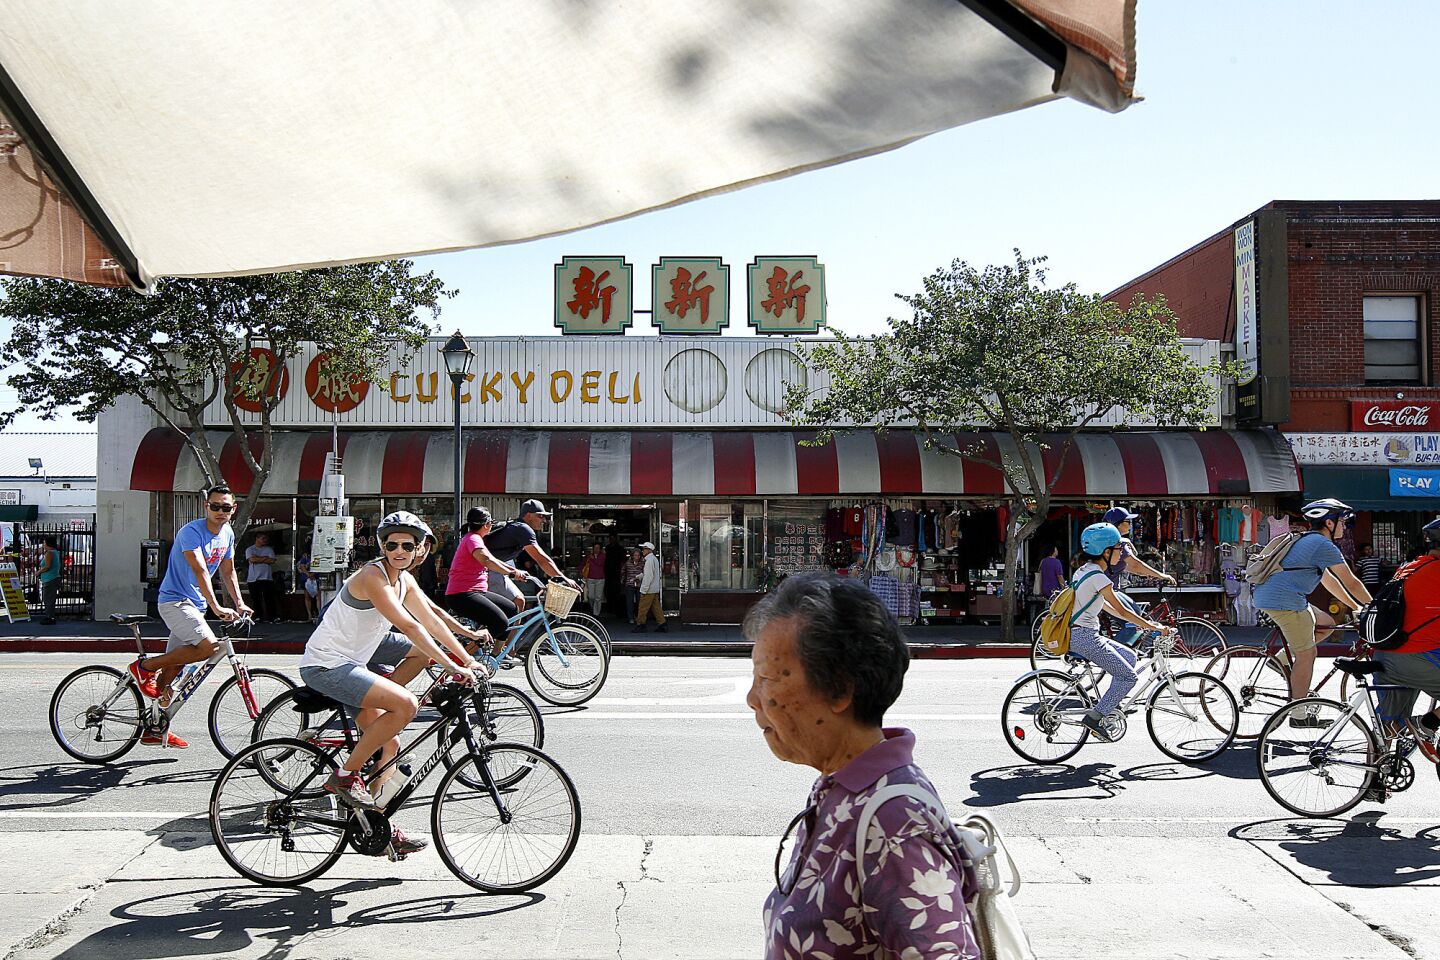 CicLAvia participants ride through Chinatown in Los Angeles on Sunday.